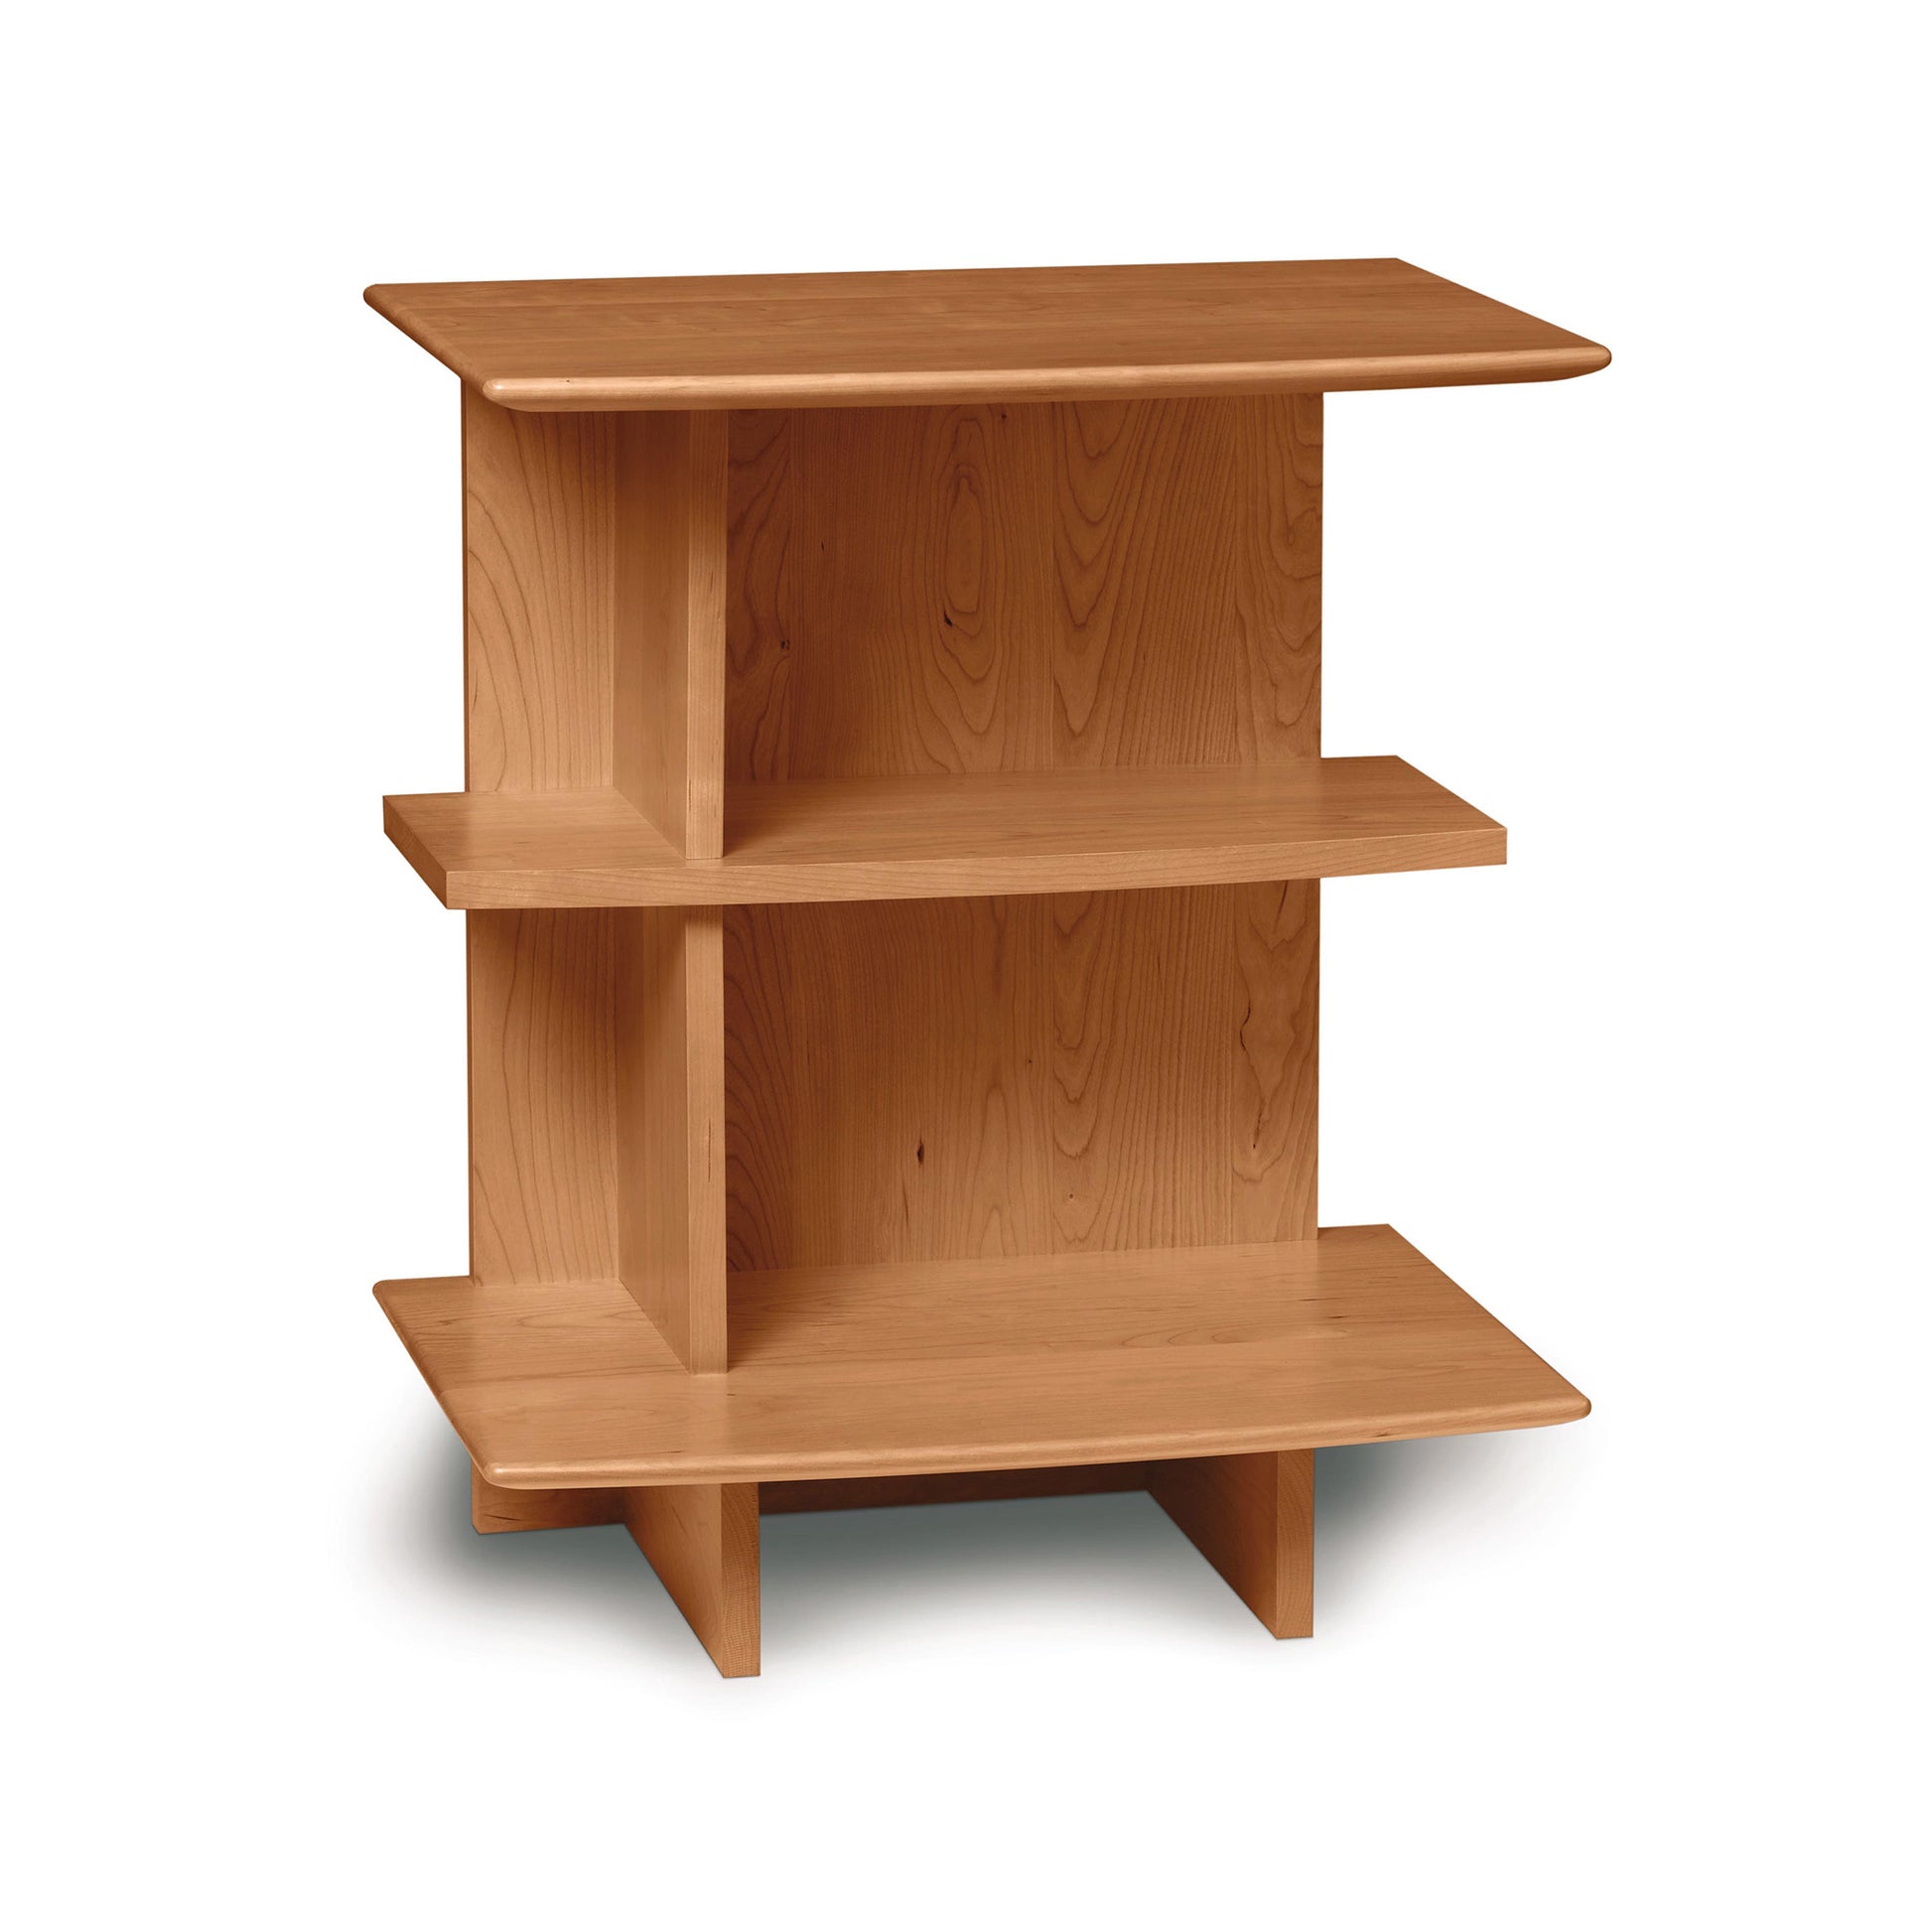 Copeland Furniture's Sarah Open Shelf Nightstand with two shelves on it.